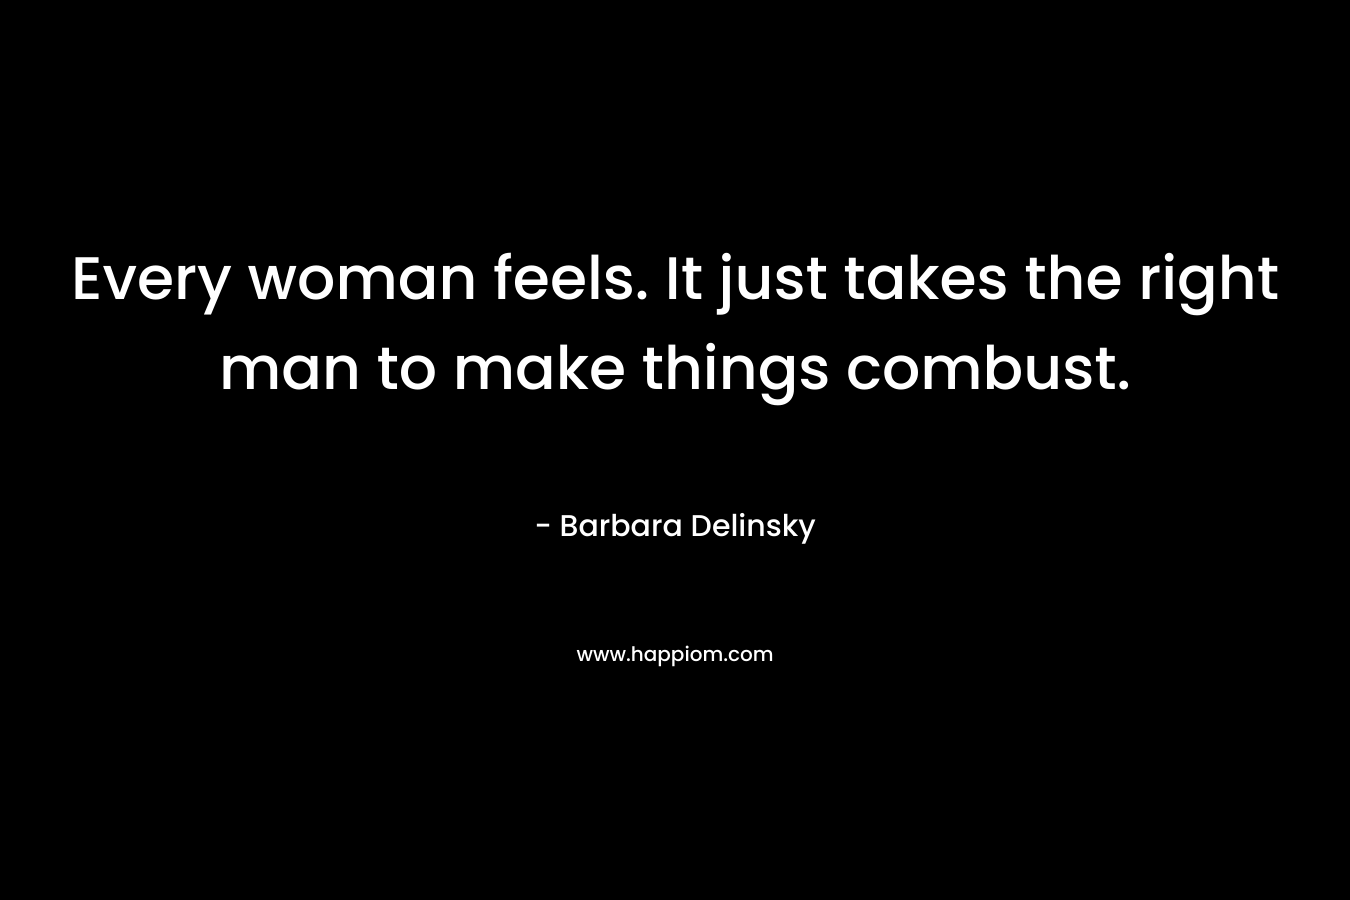 Every woman feels. It just takes the right man to make things combust.